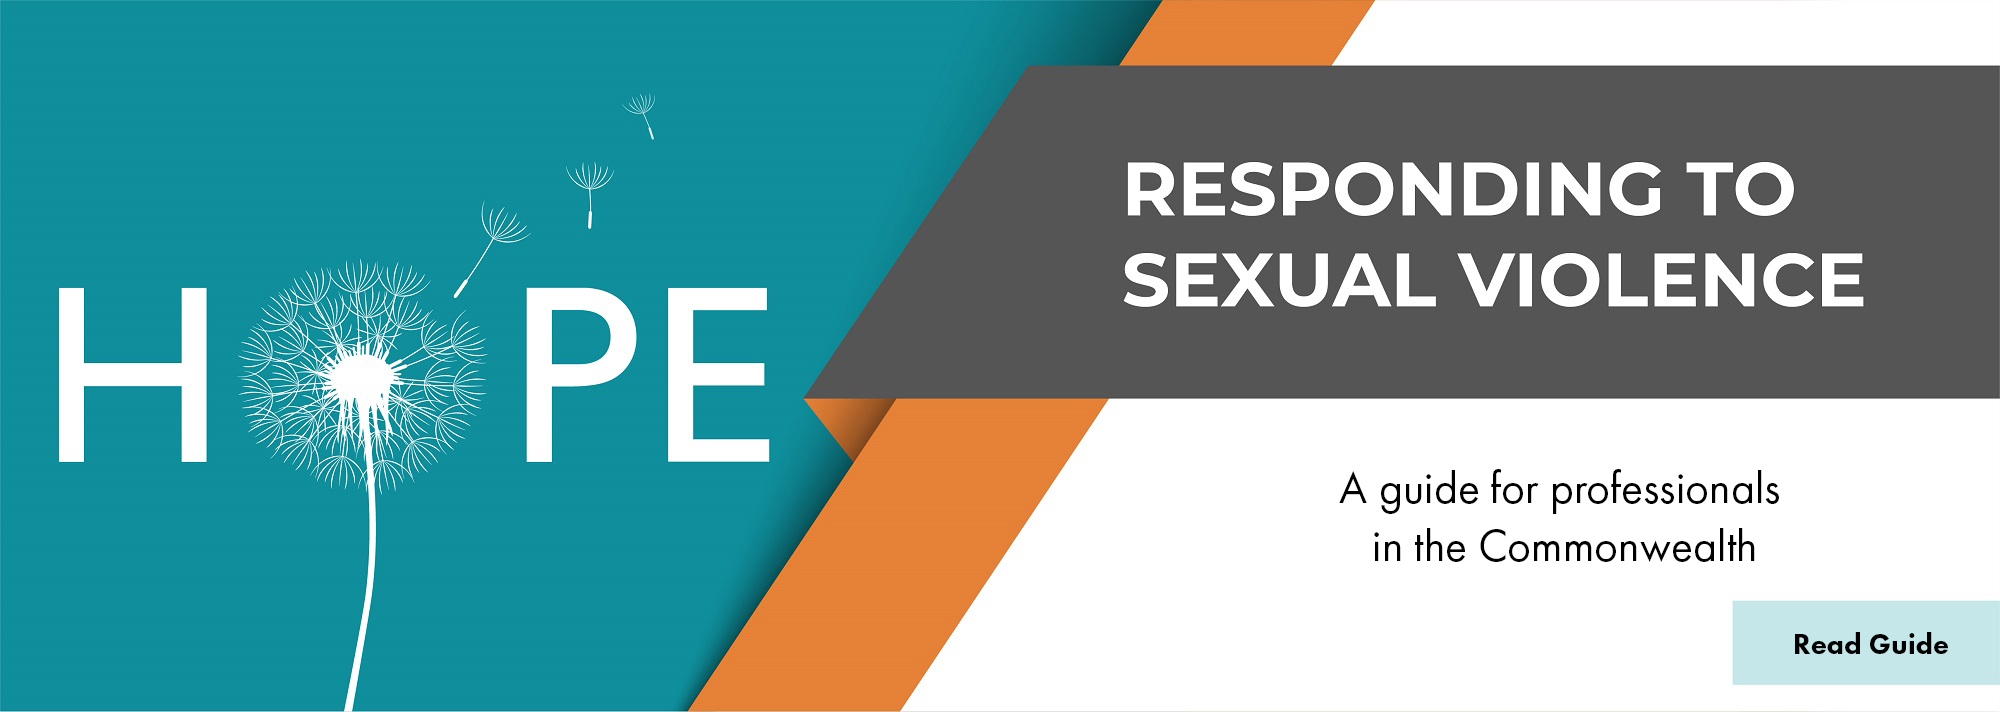 Header Banner - Responding to Sexual Violence